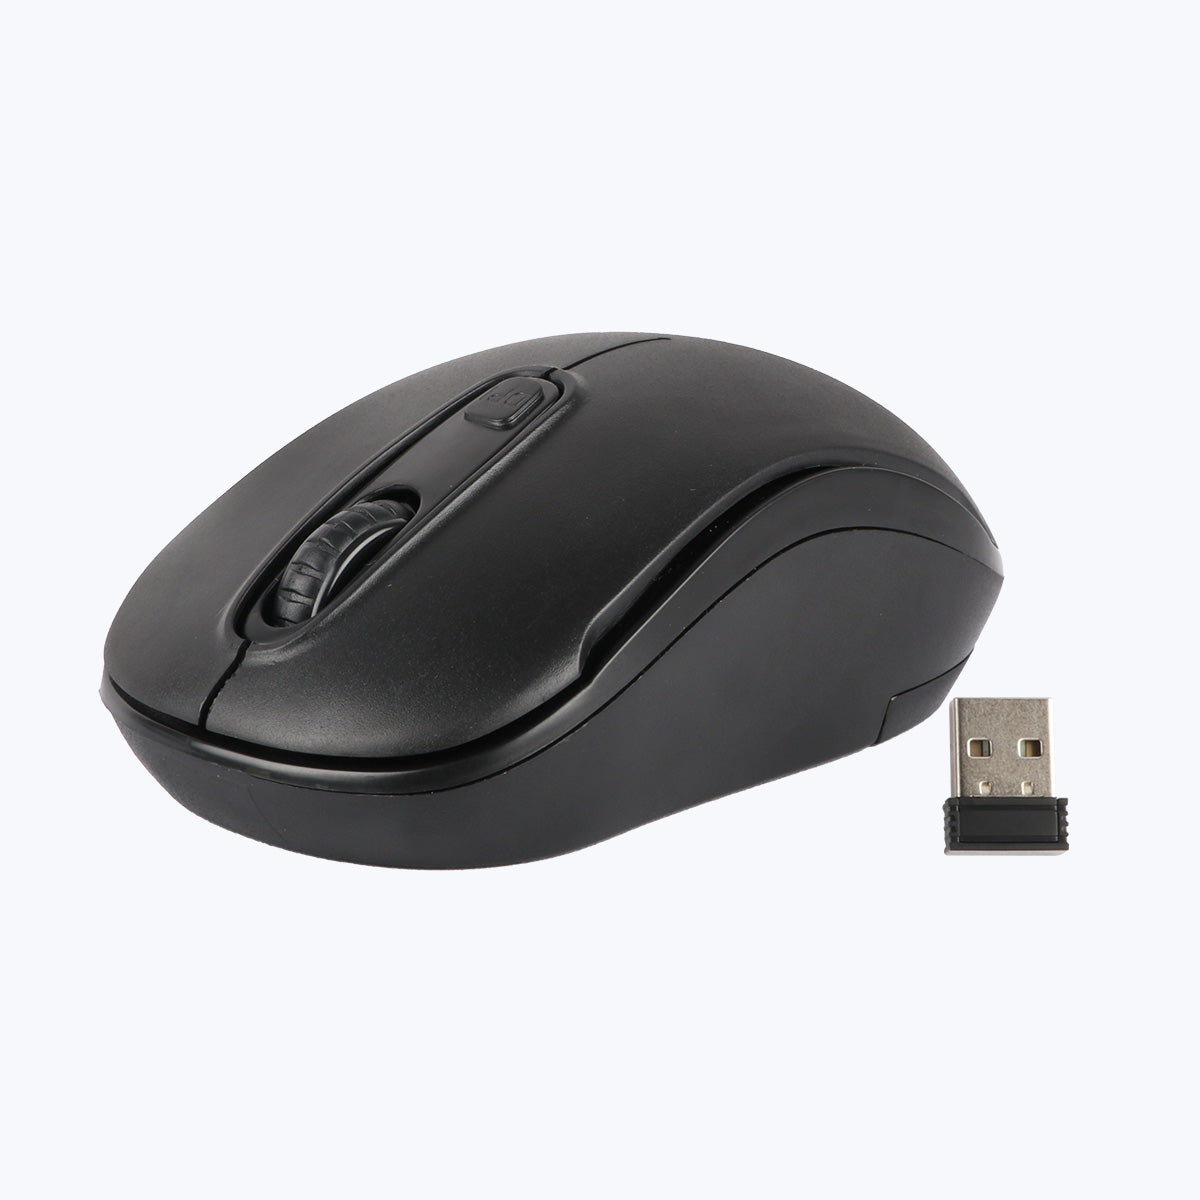 Zeb Dash Plus Wireless Mouse with 4 Buttons